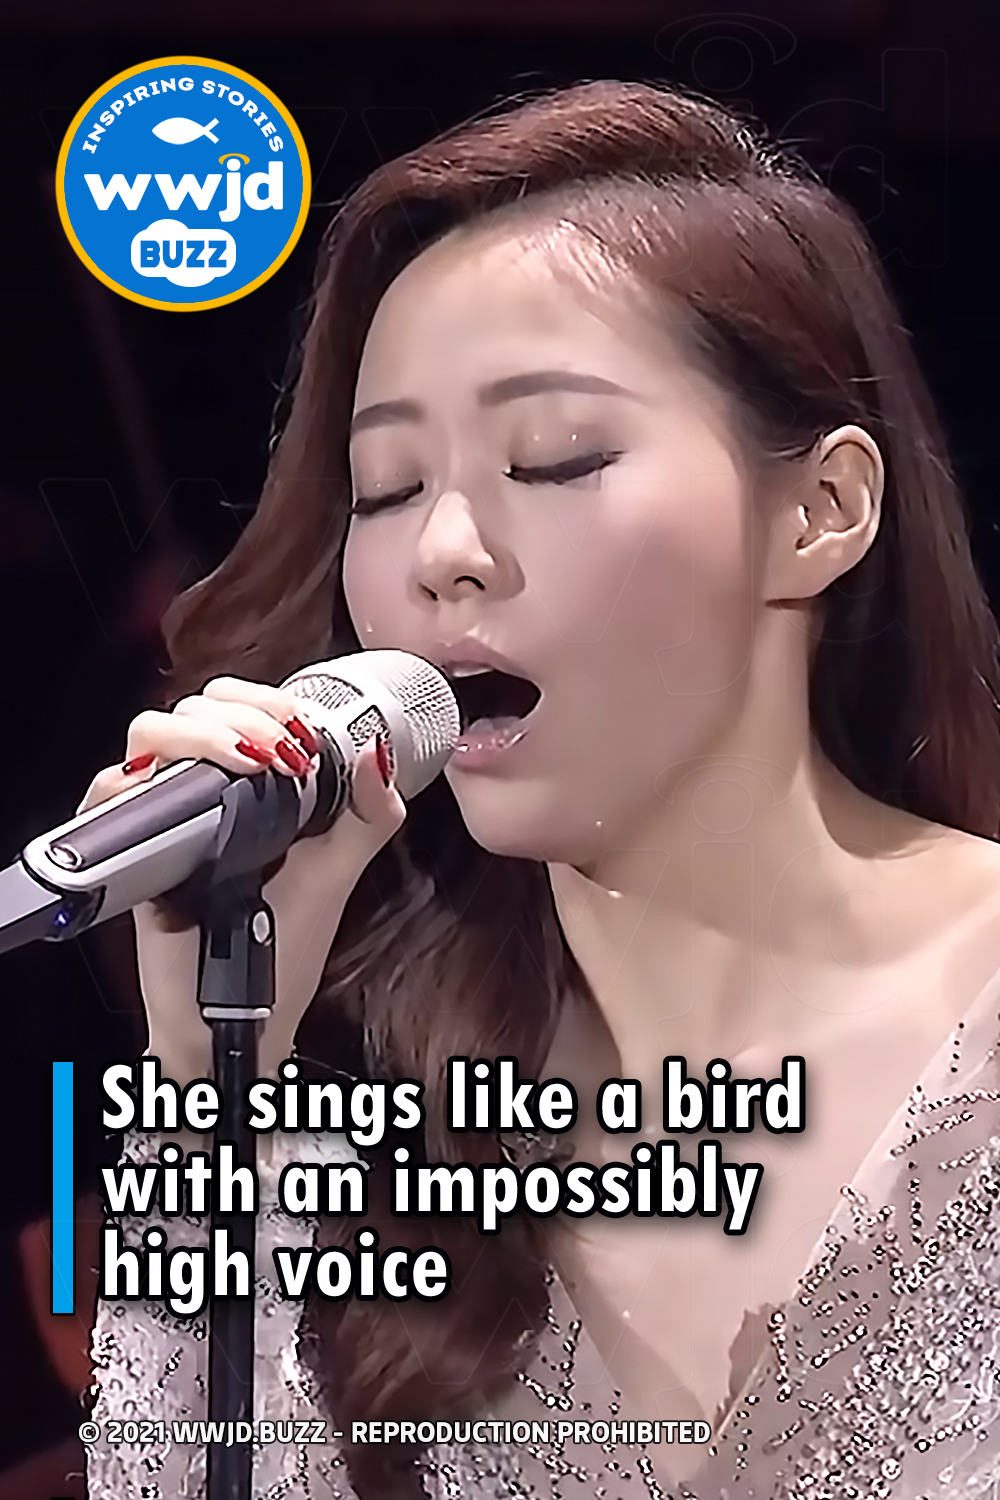 She sings like a bird with an impossibly high voice